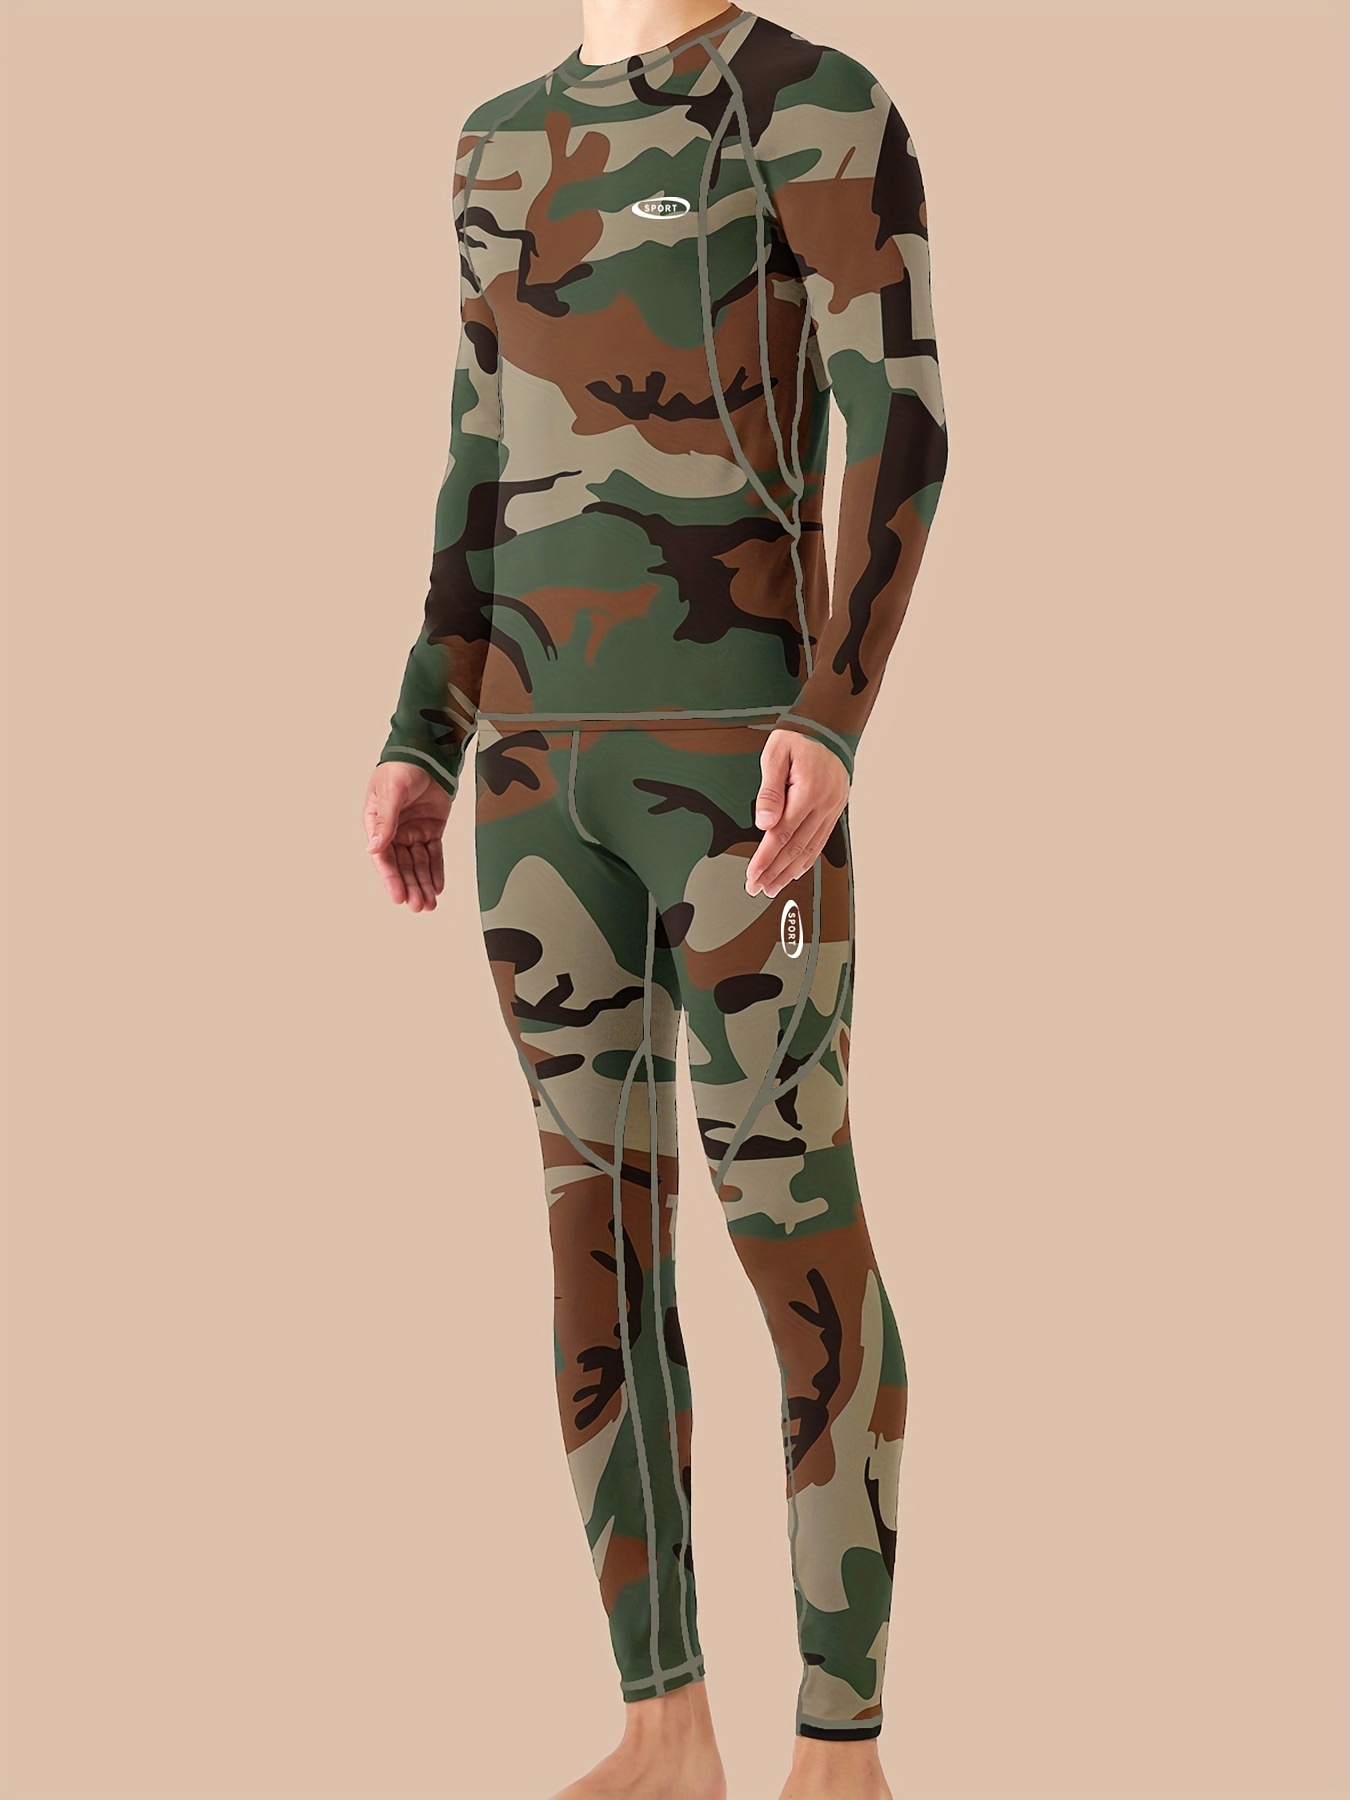 Men's Camouflage Thermal underwear set Long johns winter Thermal